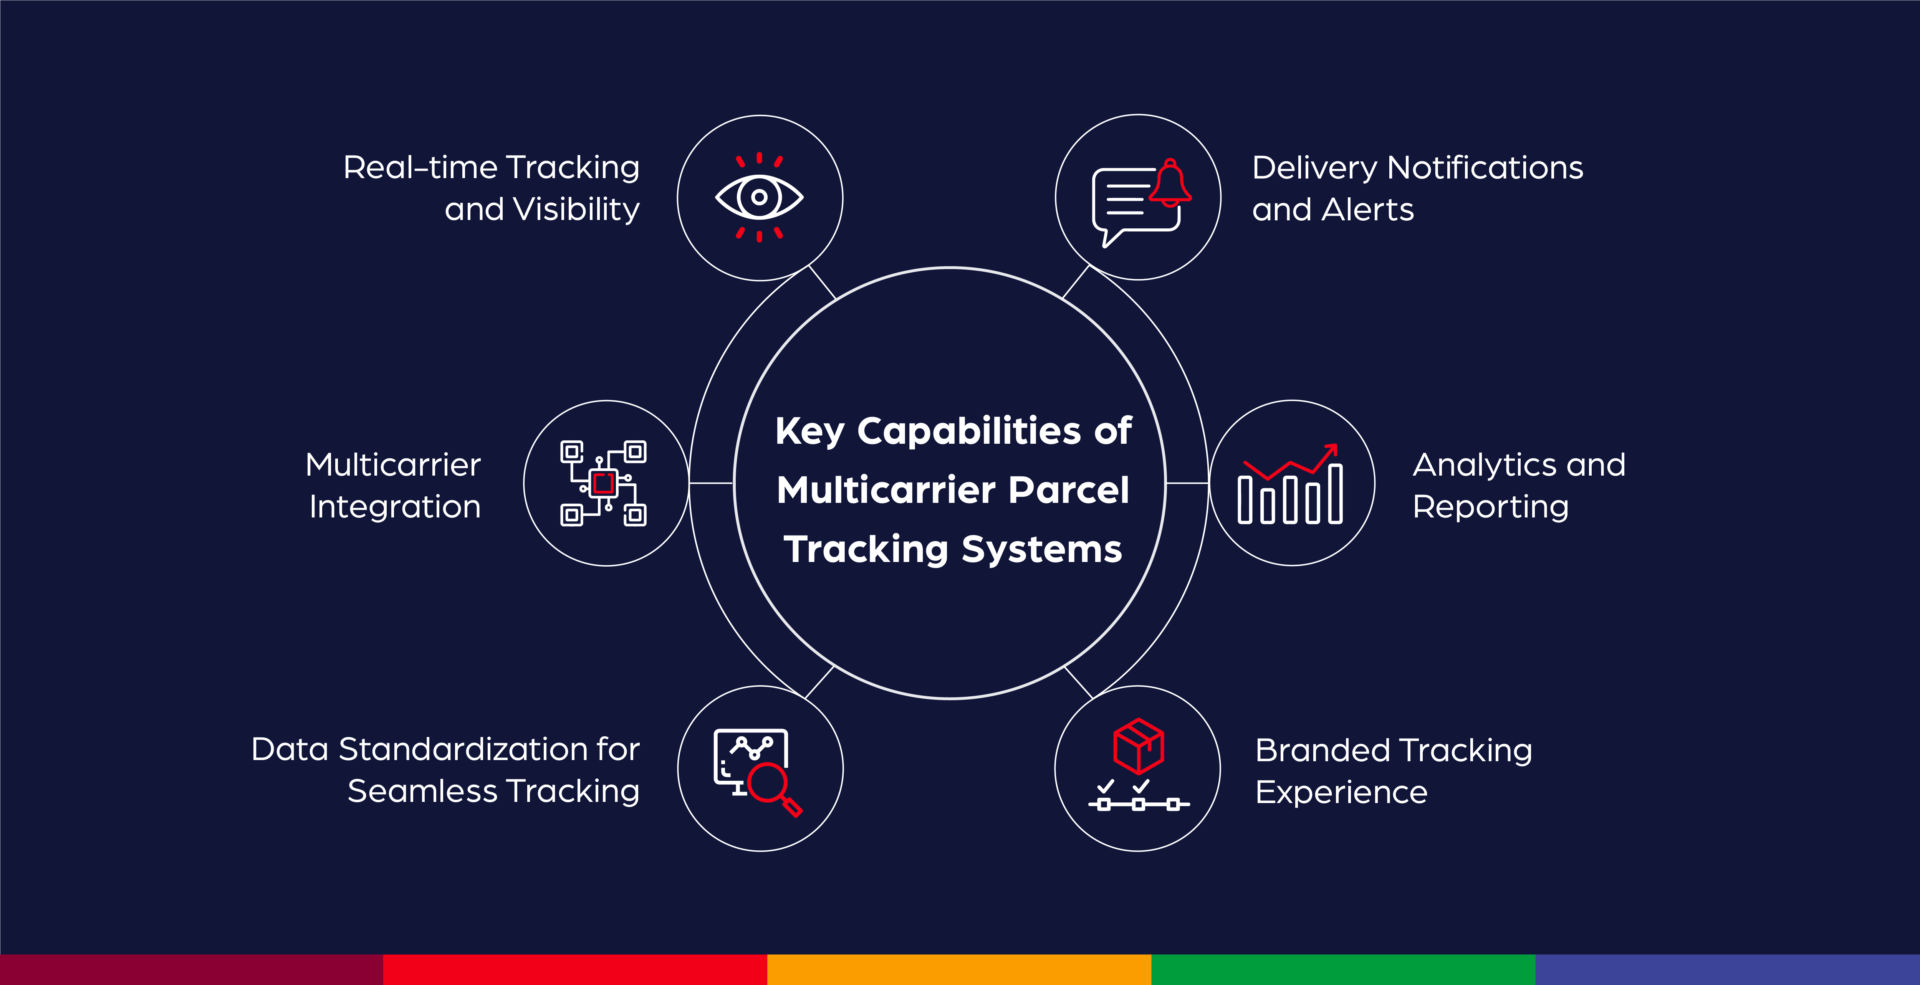 Key Capabilities of multicarrier parcel tracking